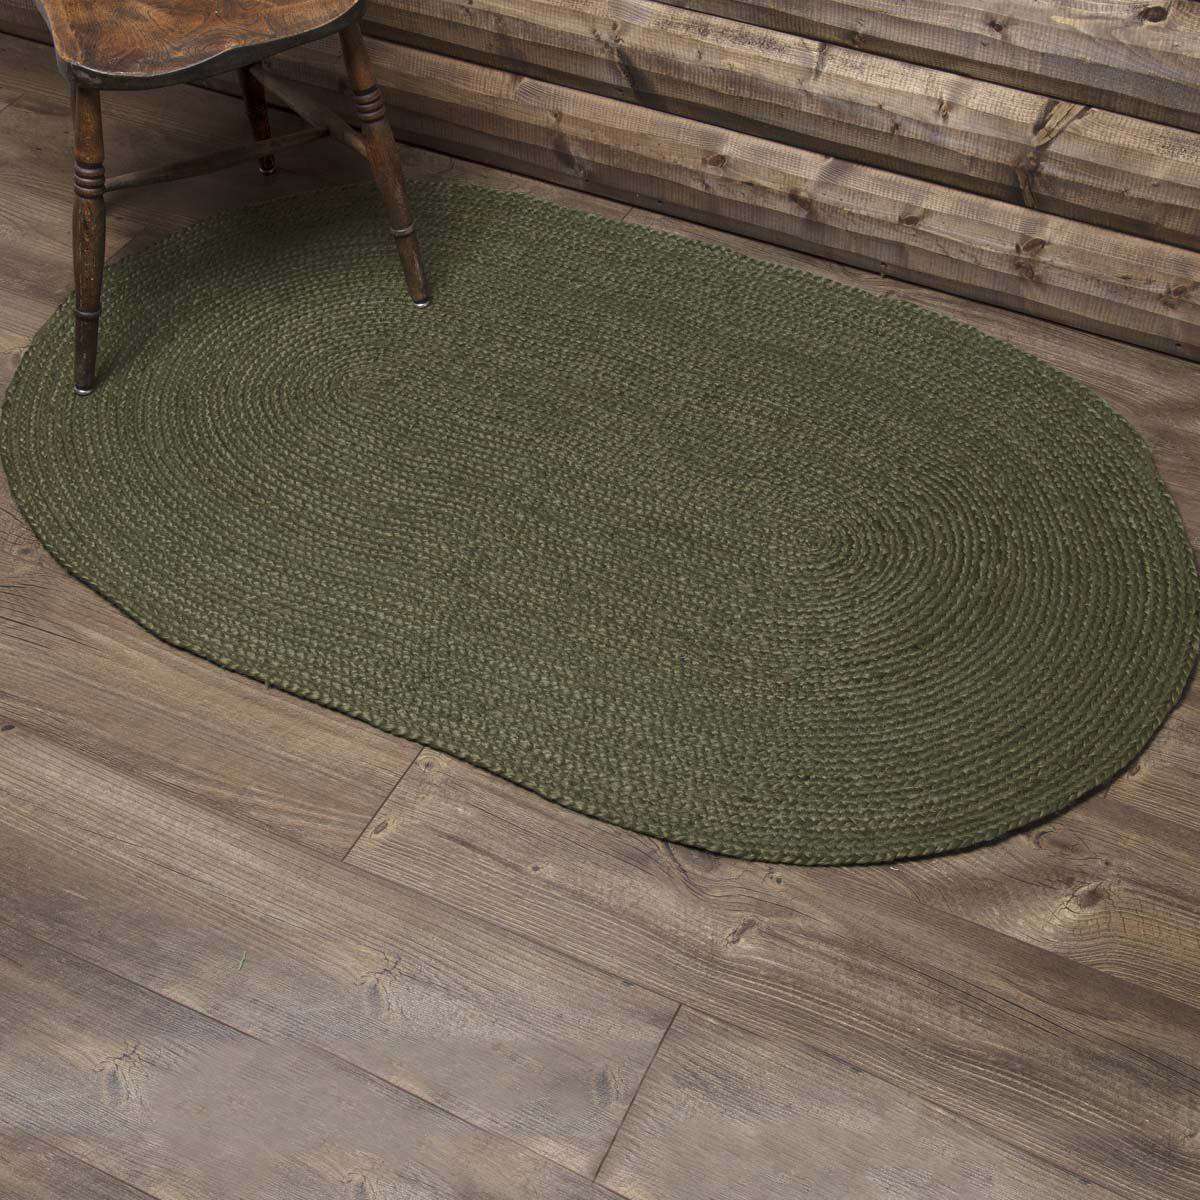 Cypress Jute Braided Oval Rugs VHC Brands Rugs VHC Brands 3'x5' 